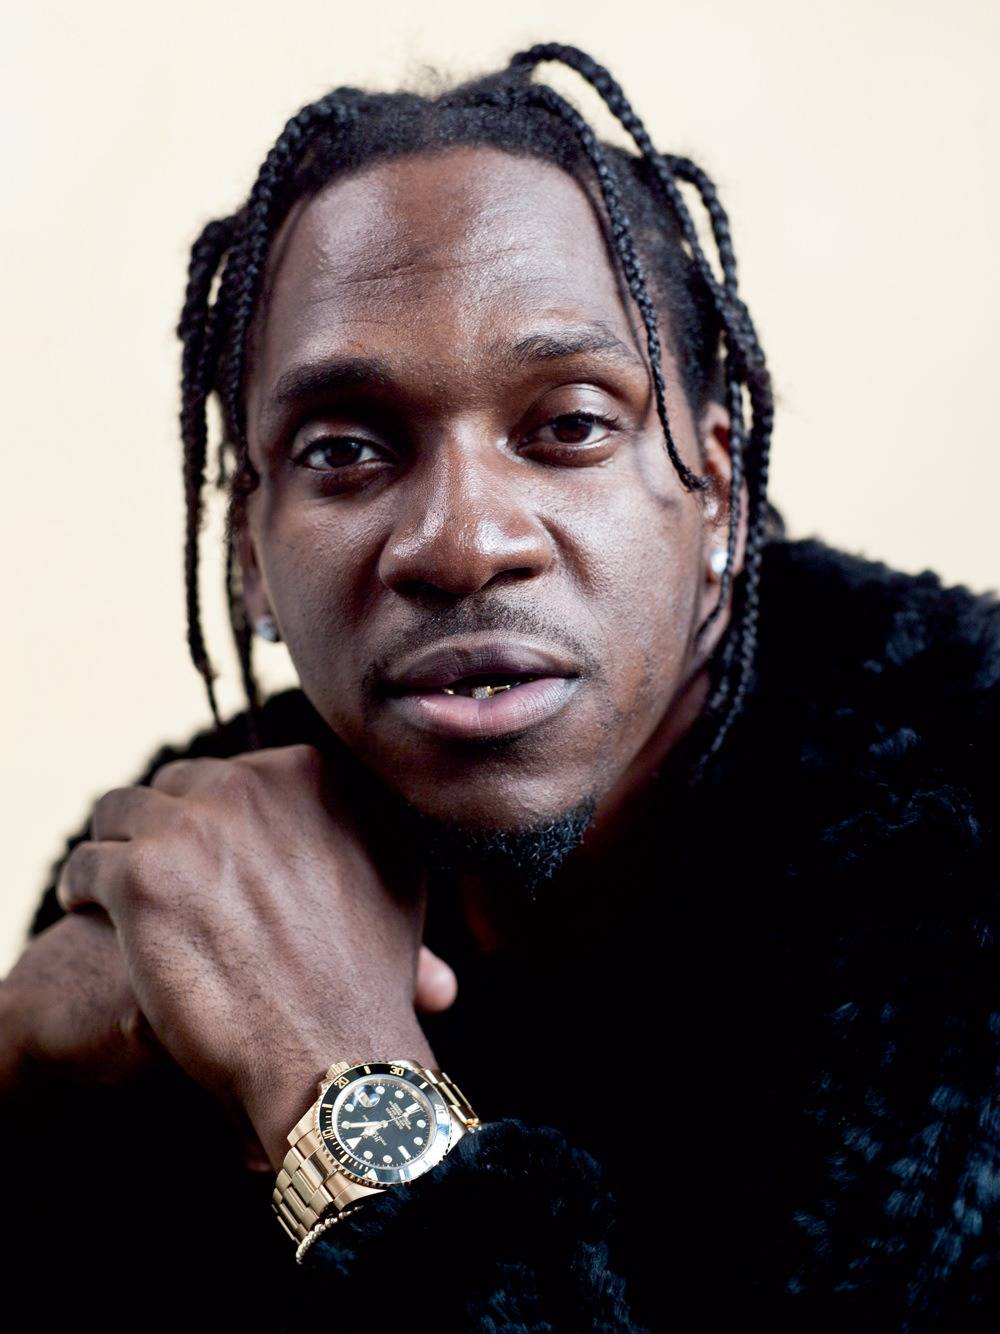 Meeting with Pusha T 